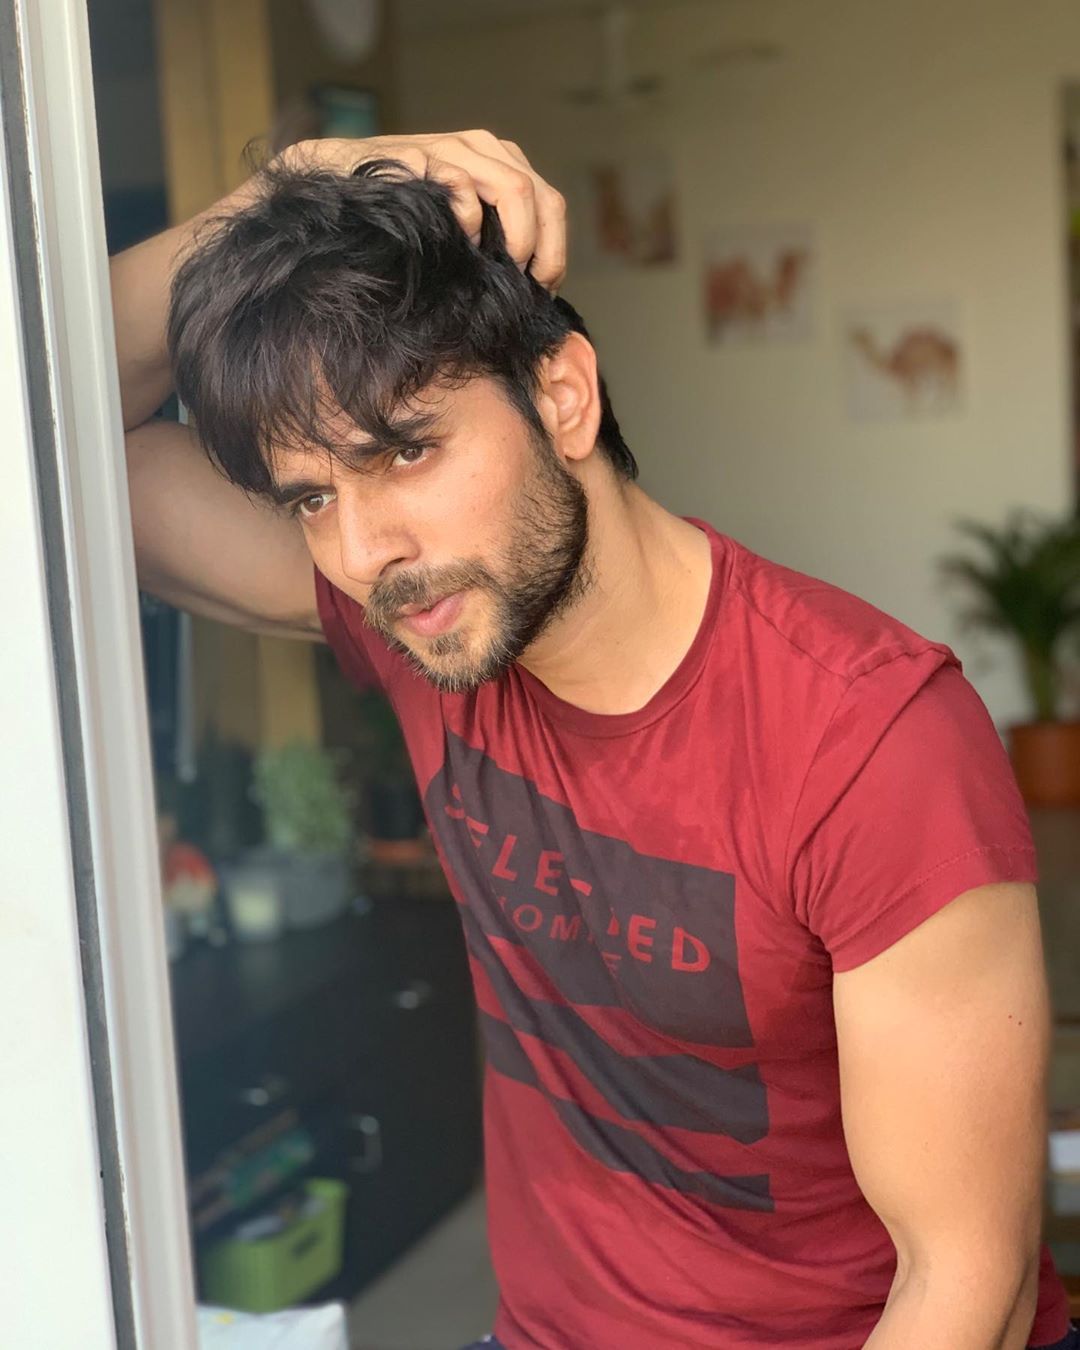 TV Actor Ansh Bagri Sustains Injuries On His Head After Being Attacked Outside His Home In Delhi, Files Police Complaint